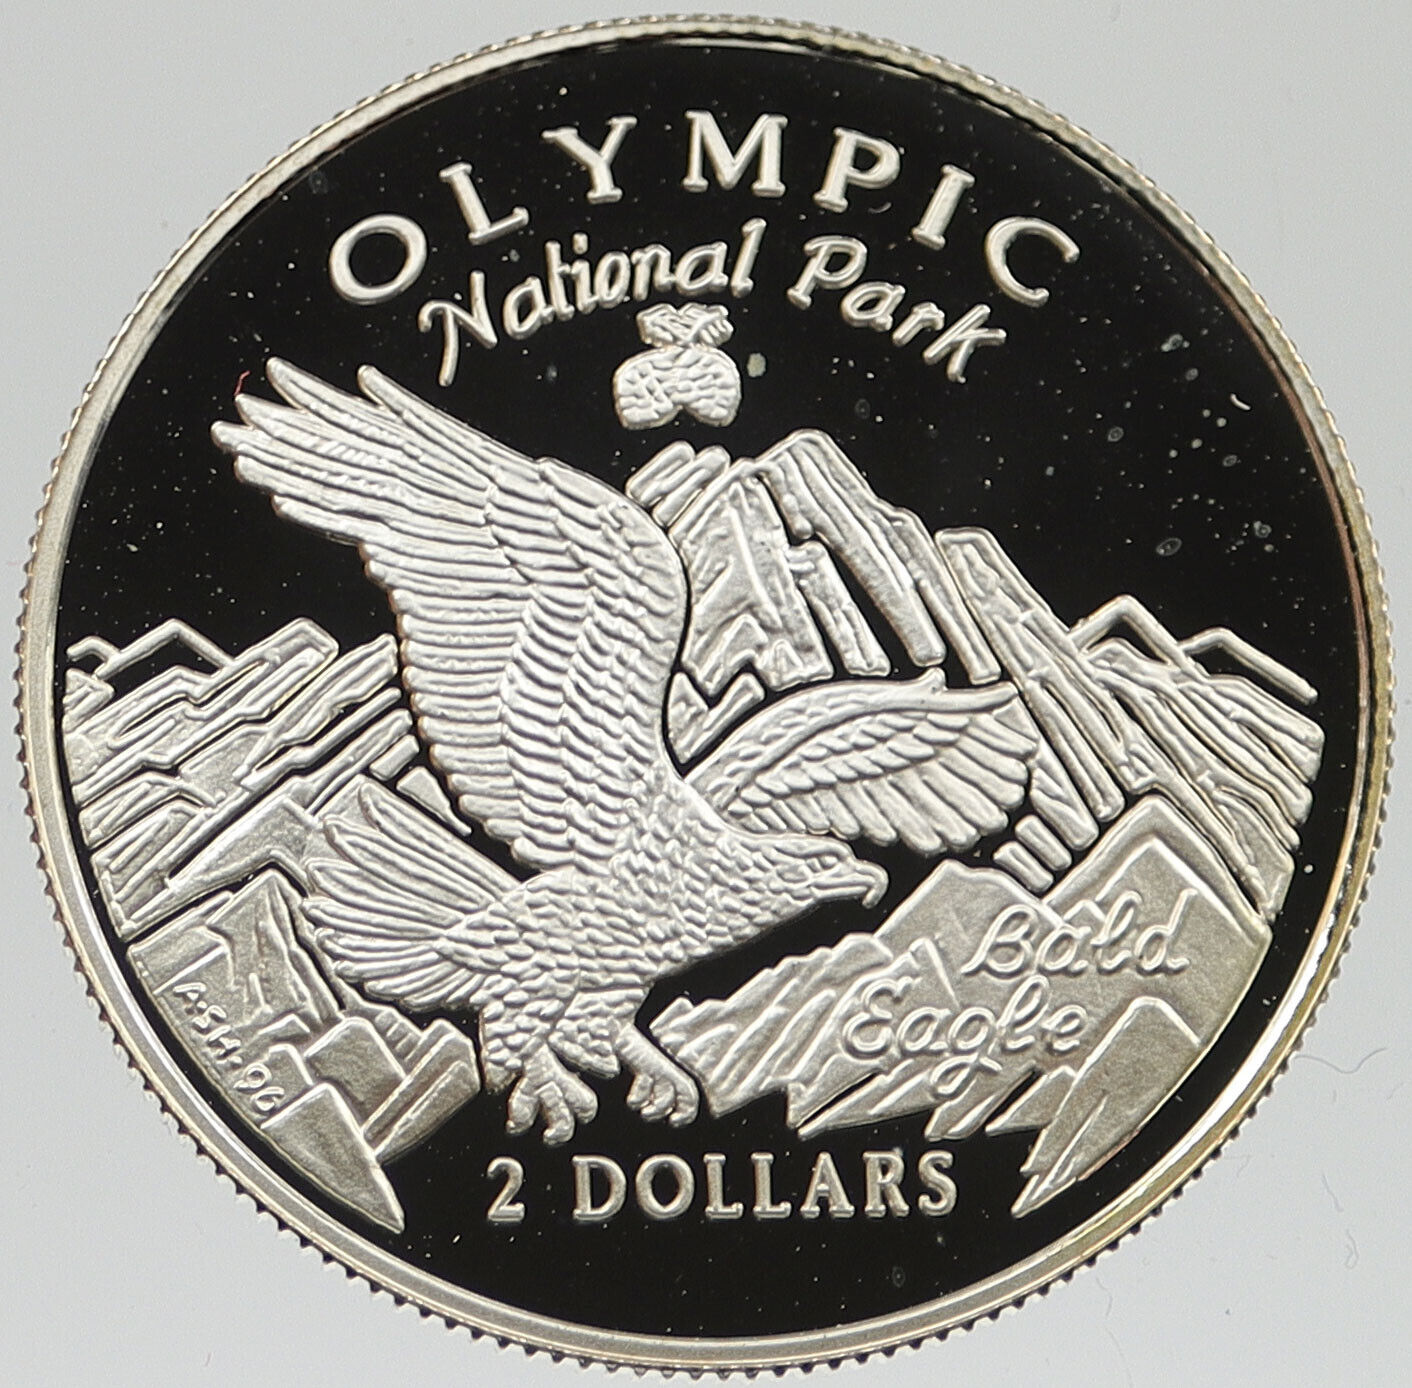 1996 COOK ISLANDS Proof SILVER 2 Dollars OLYMPIC NATIONAL PARK Coin i120281